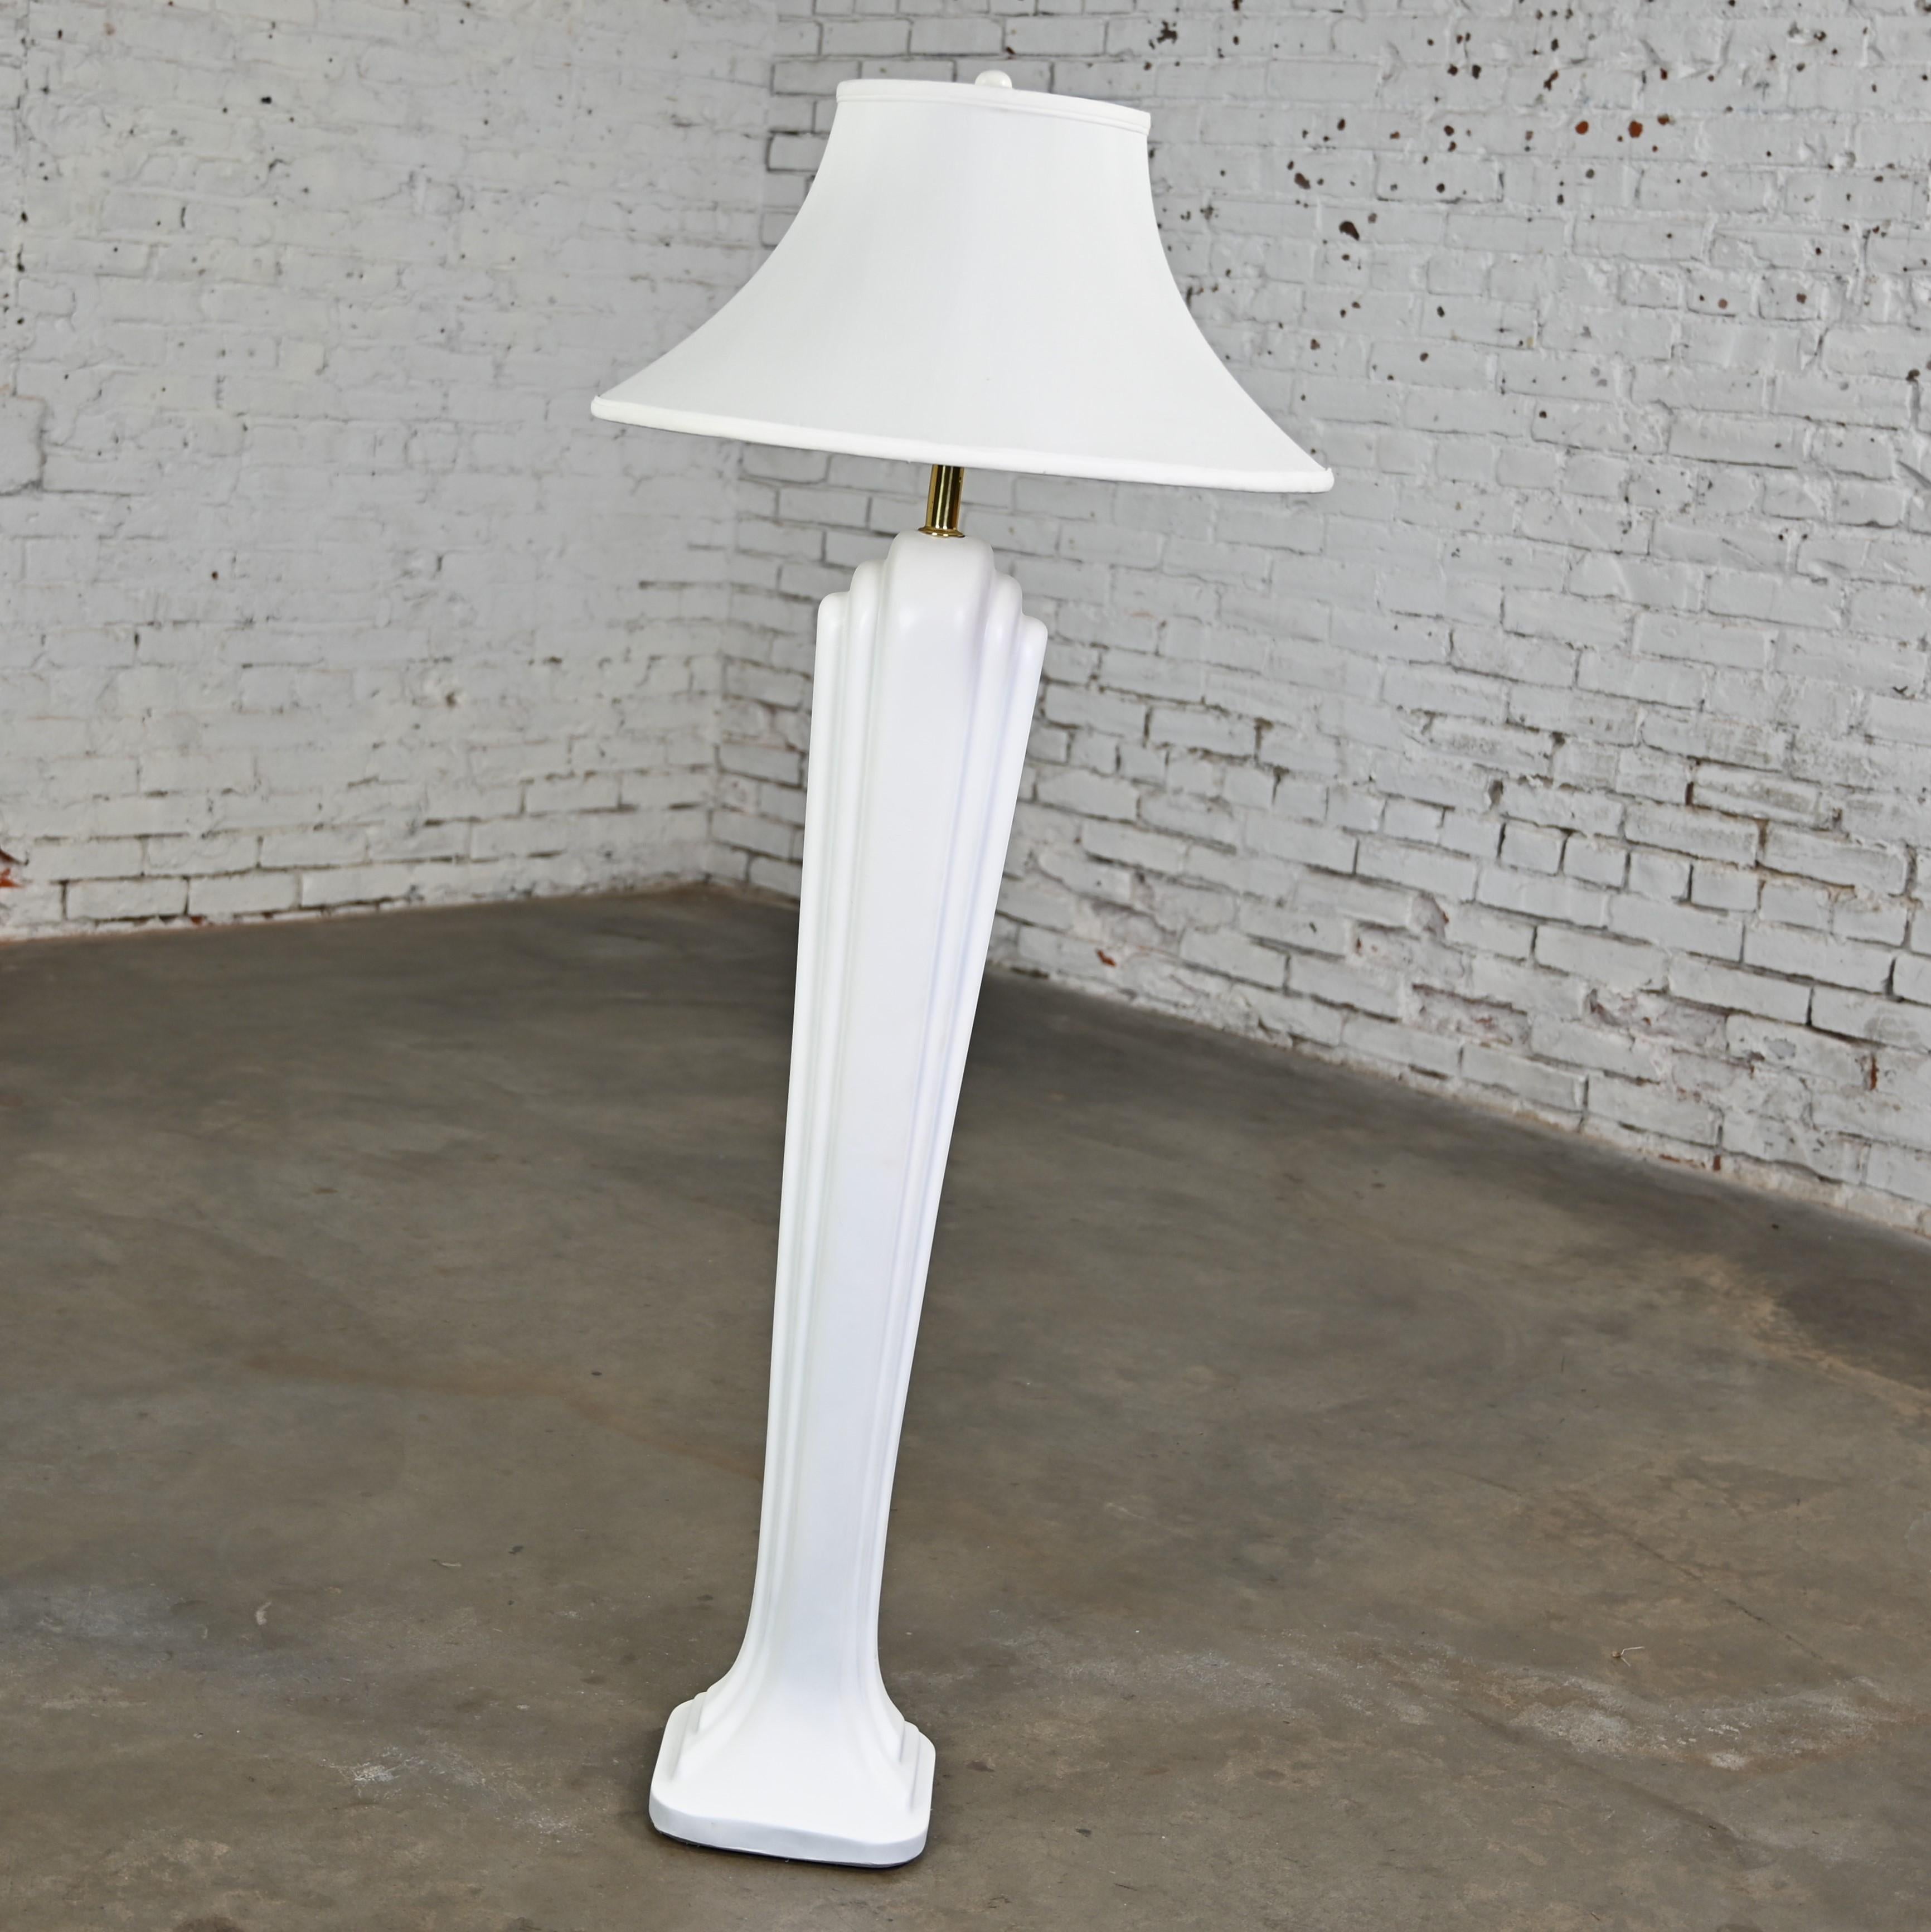 Art Deco Revival to Postmodern Paolo Gucci Floor Lamp White Sculpted Resin  For Sale 11